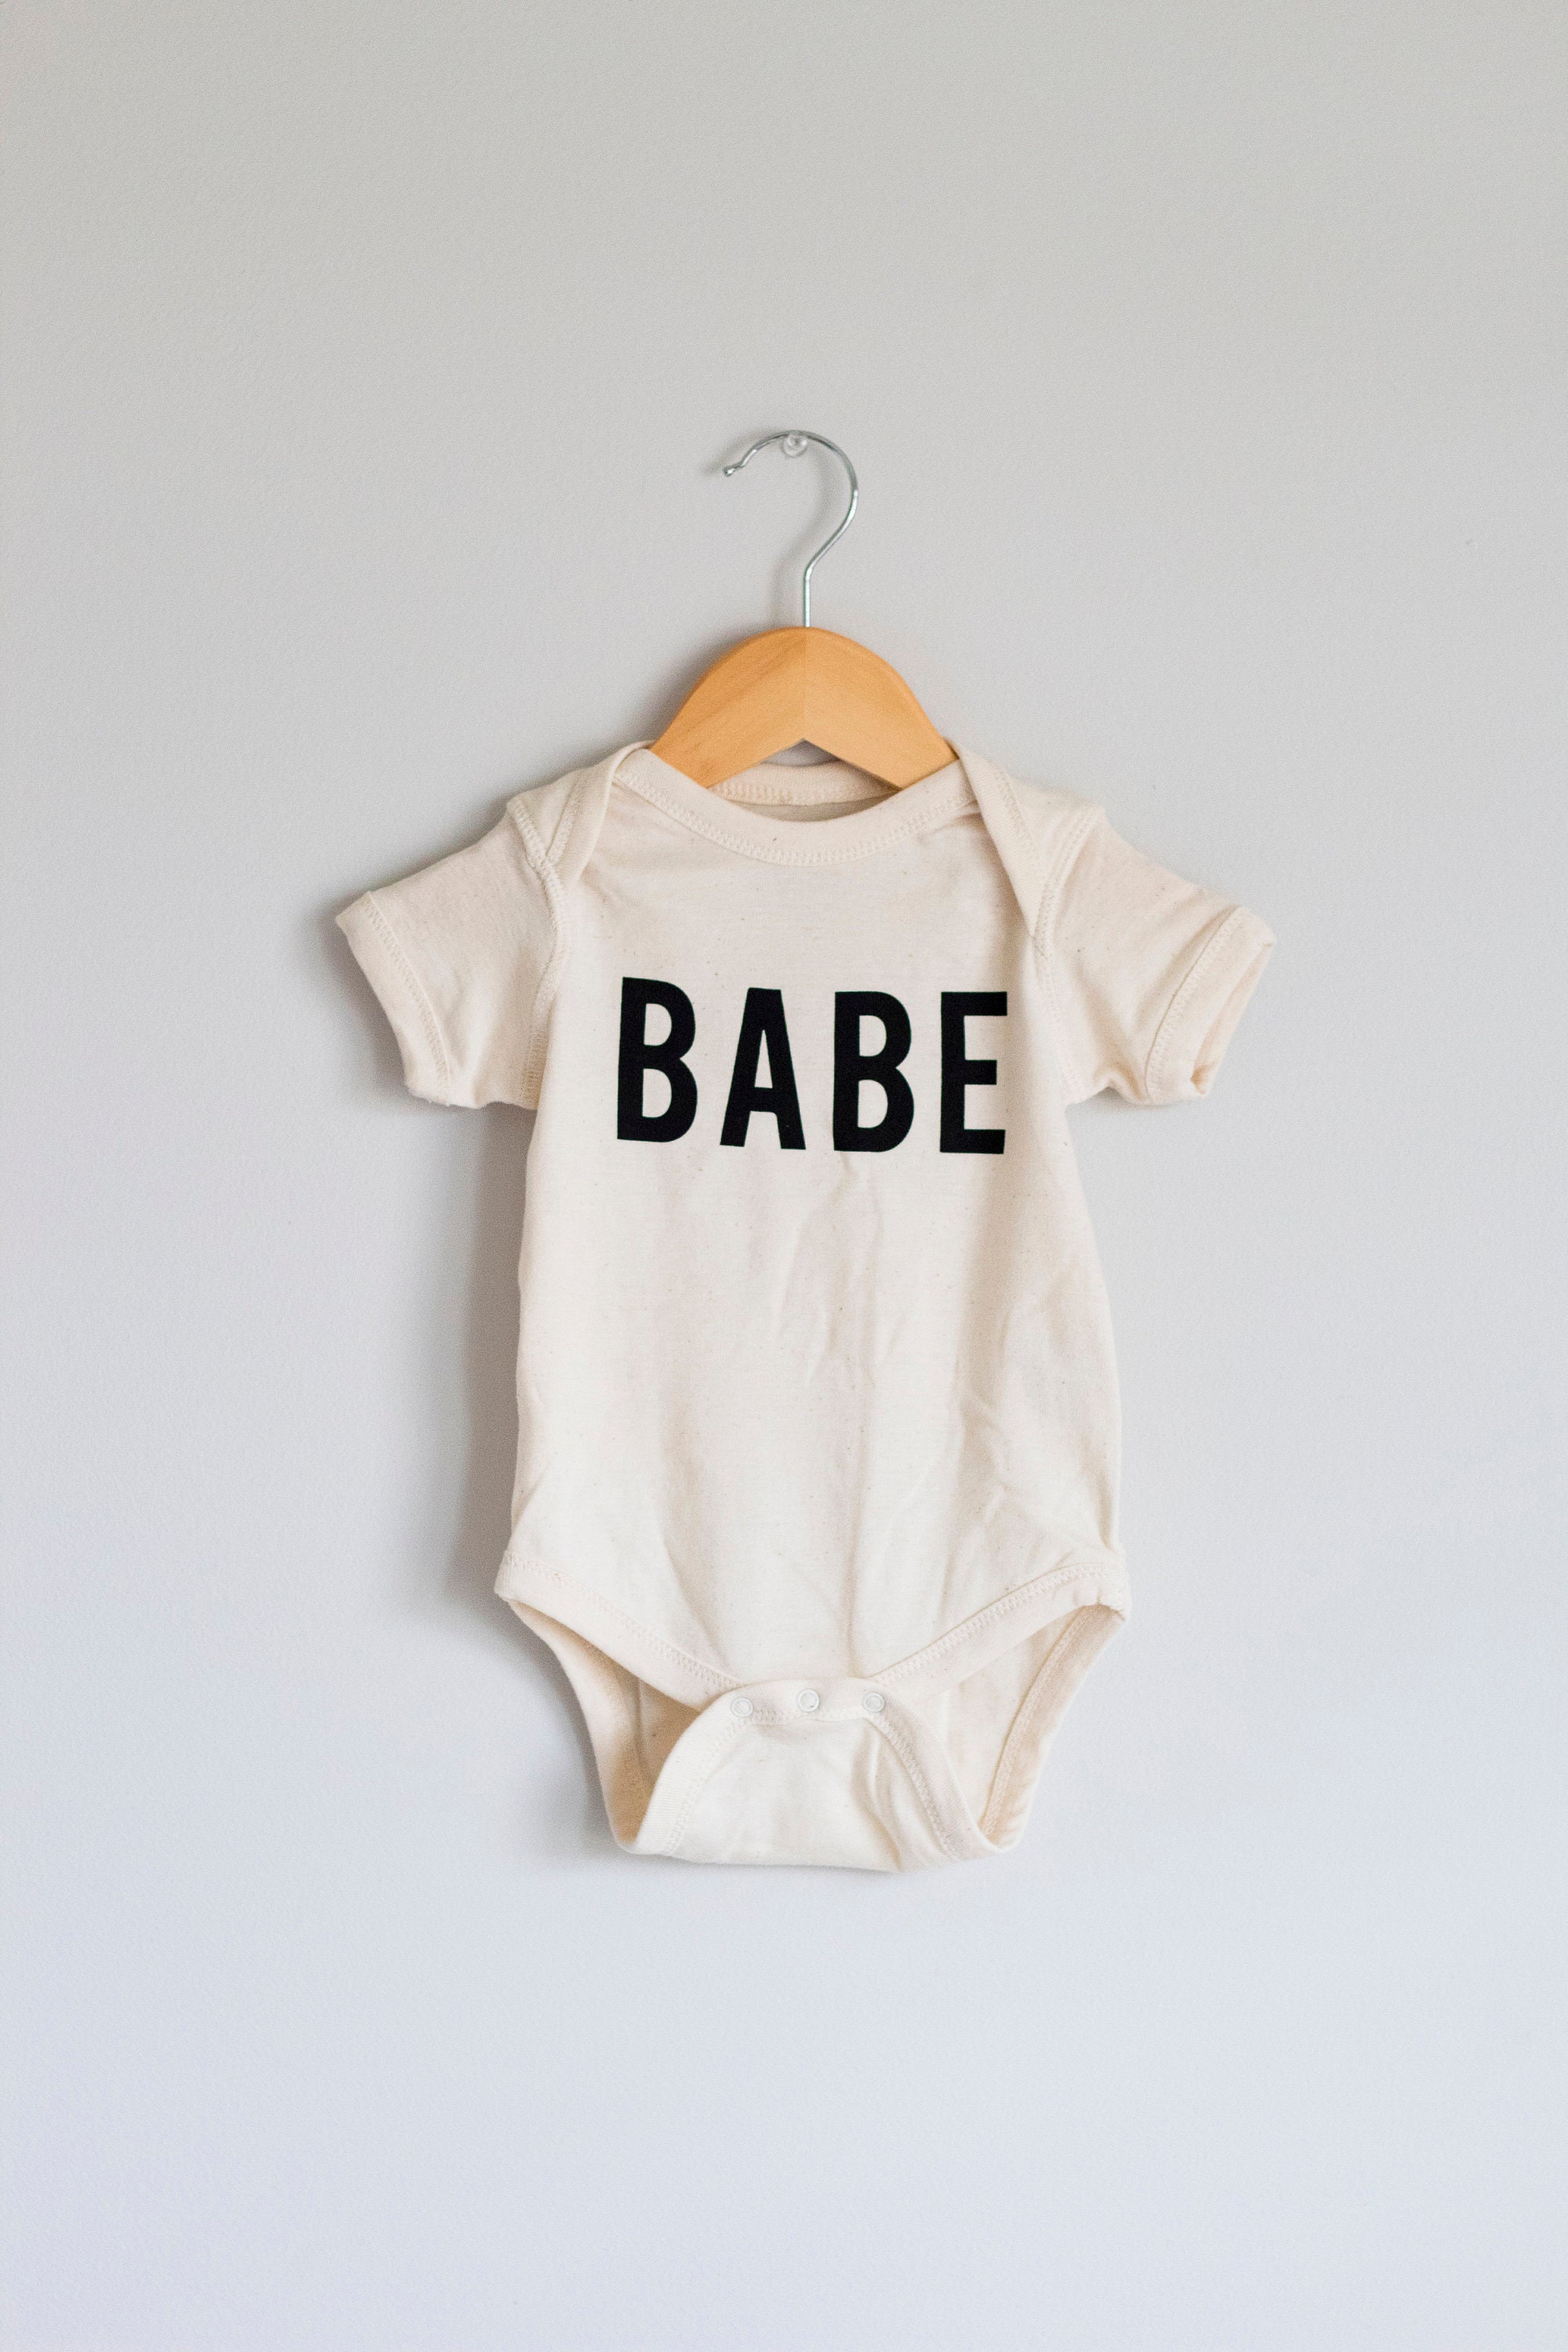 Babe screen printed baby bodysuit infant one piece | Etsy